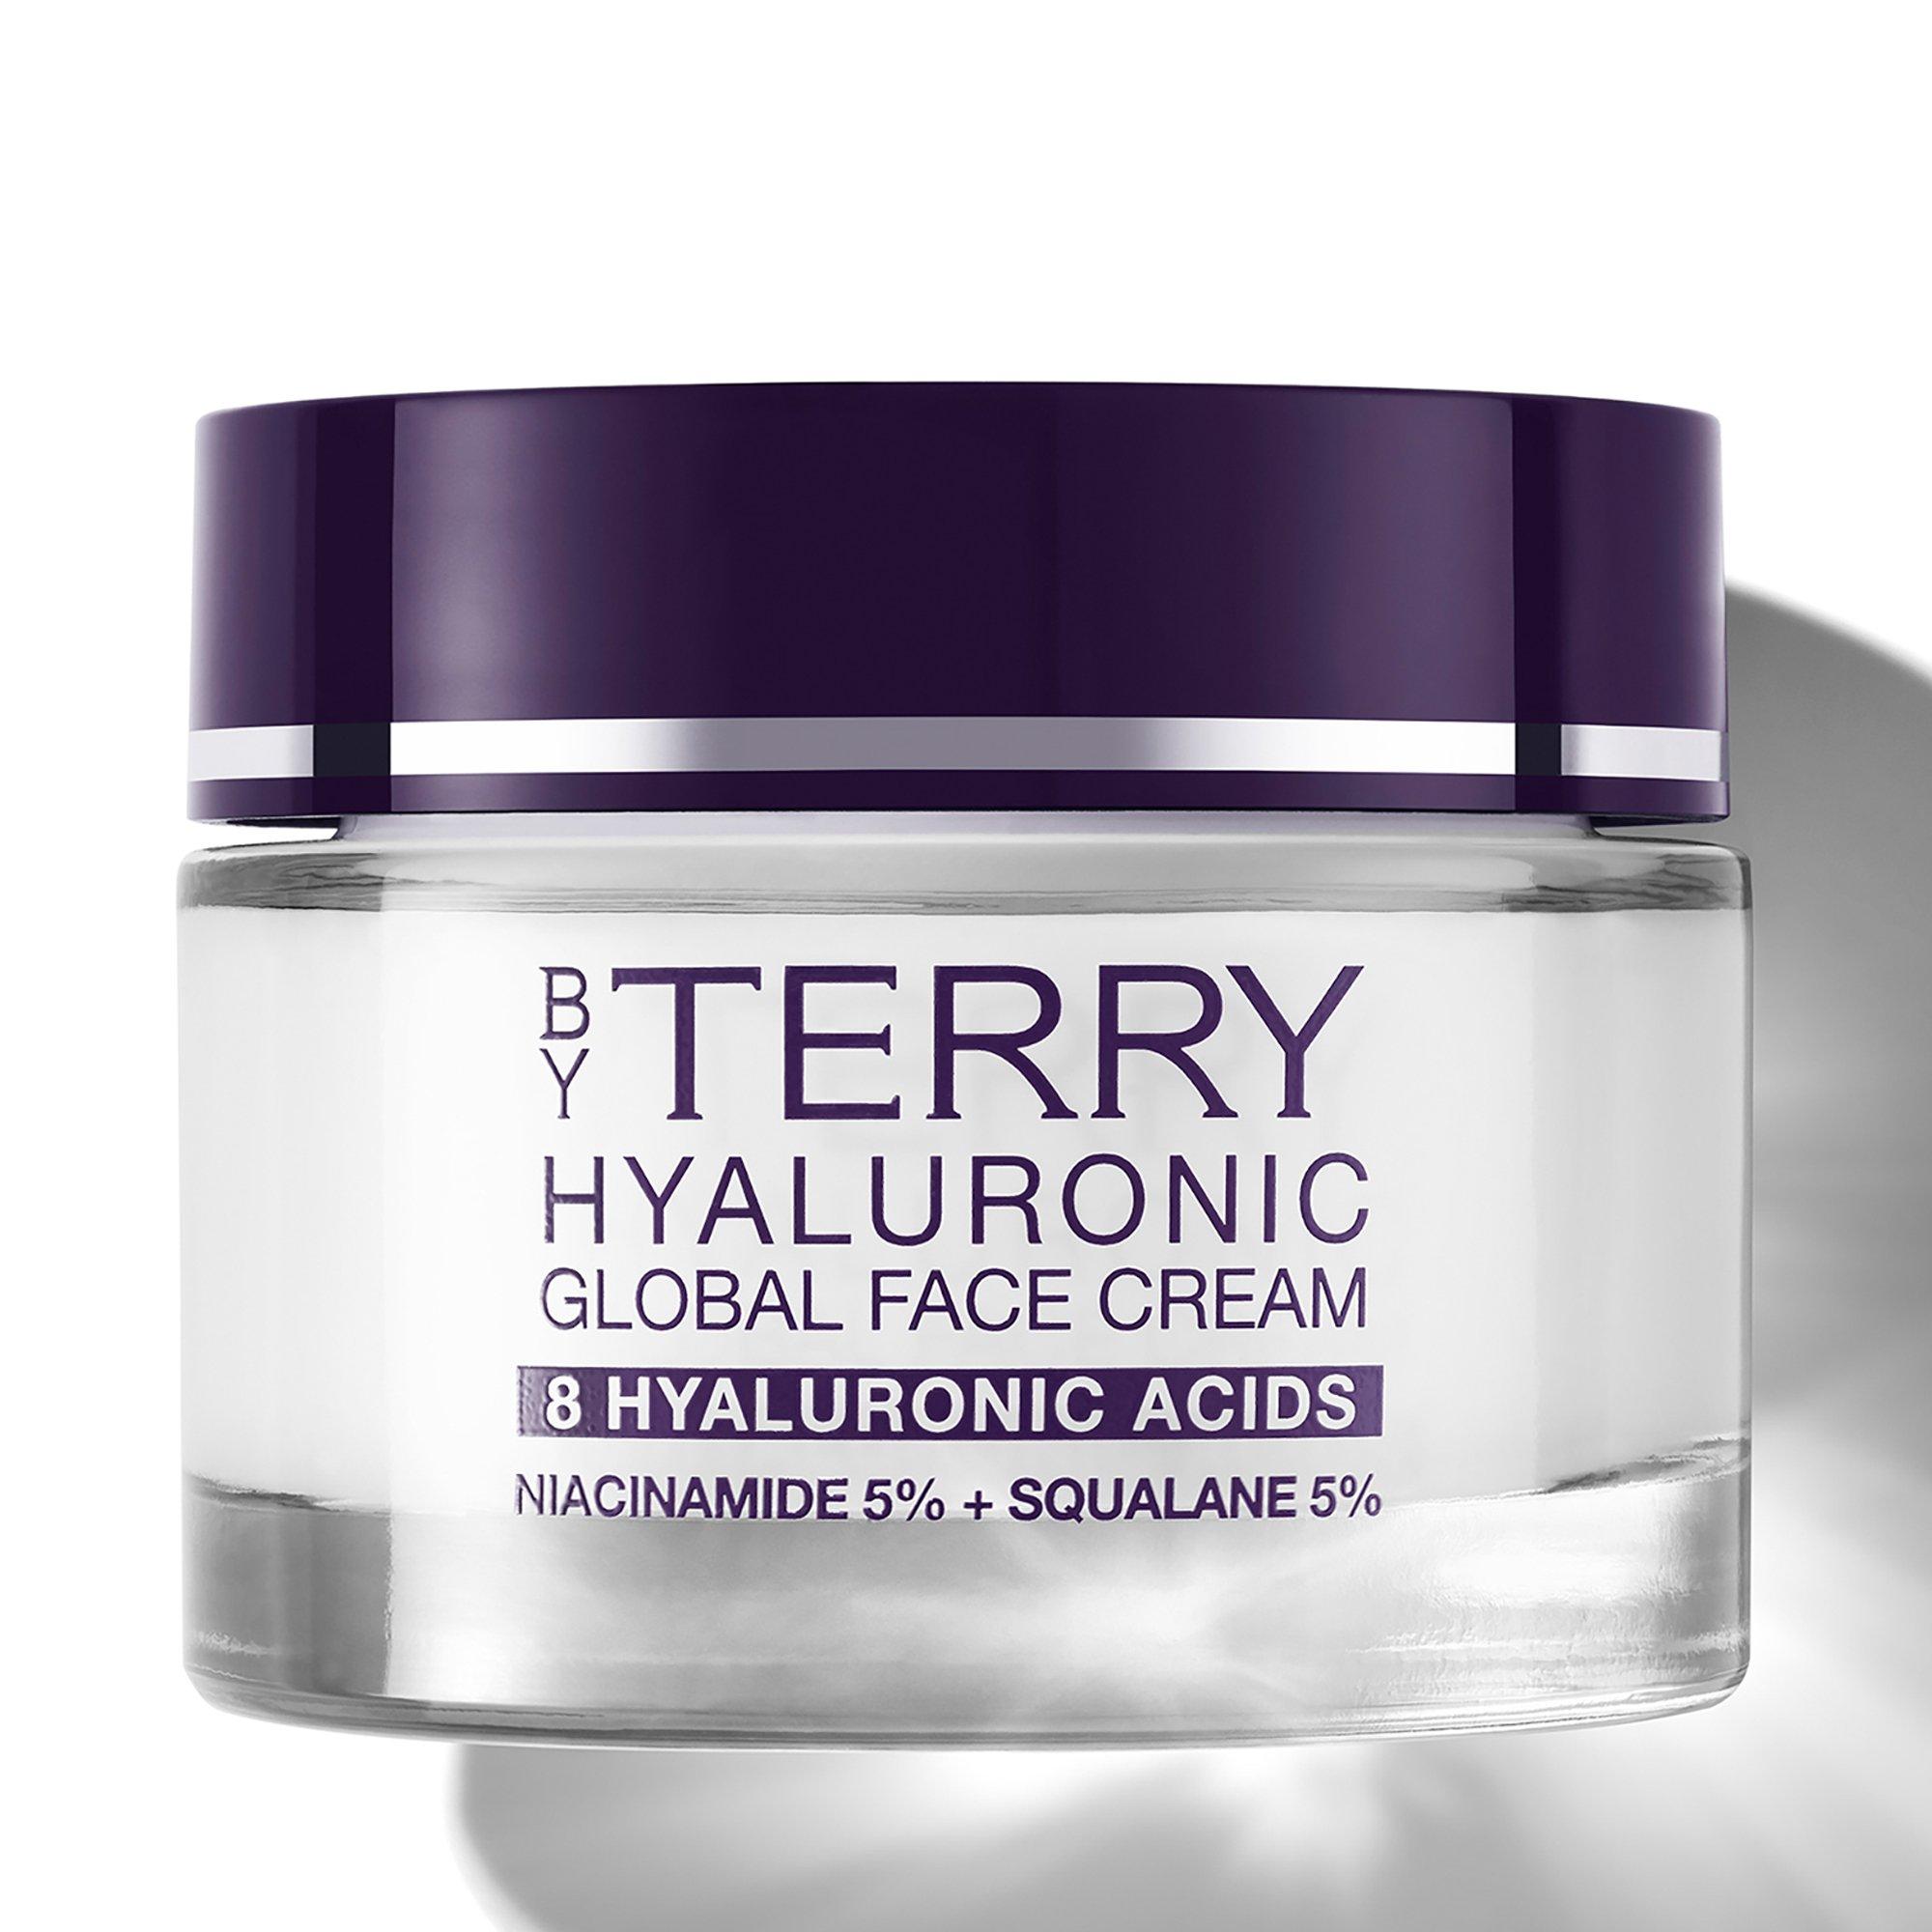 BY TERRY Hyaluronic Hyaluronic Global Face Cream 